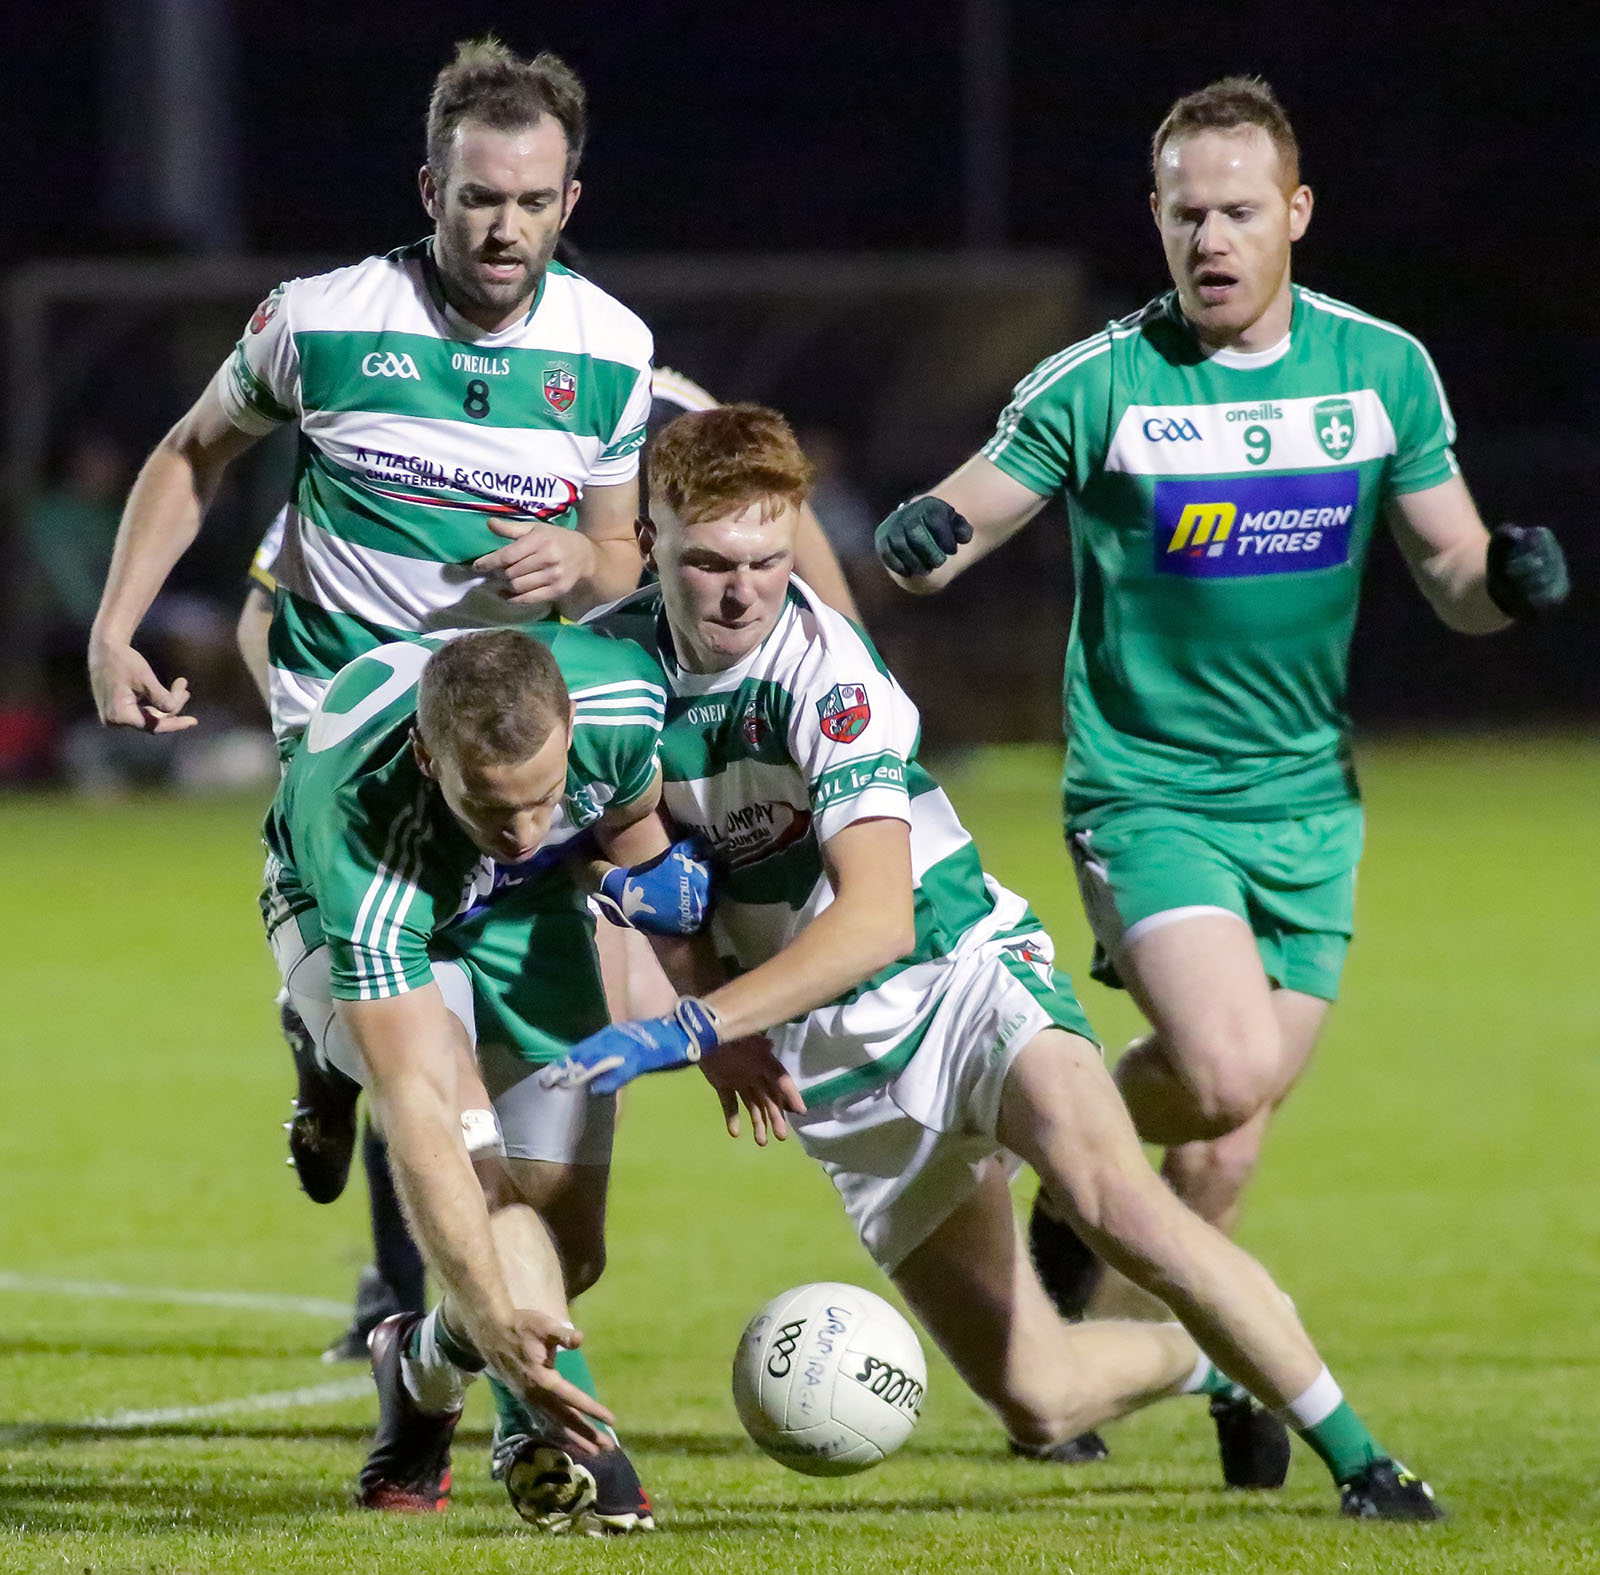 Two ‘Drums’ aim to ‘beat’ a path to the Junior final